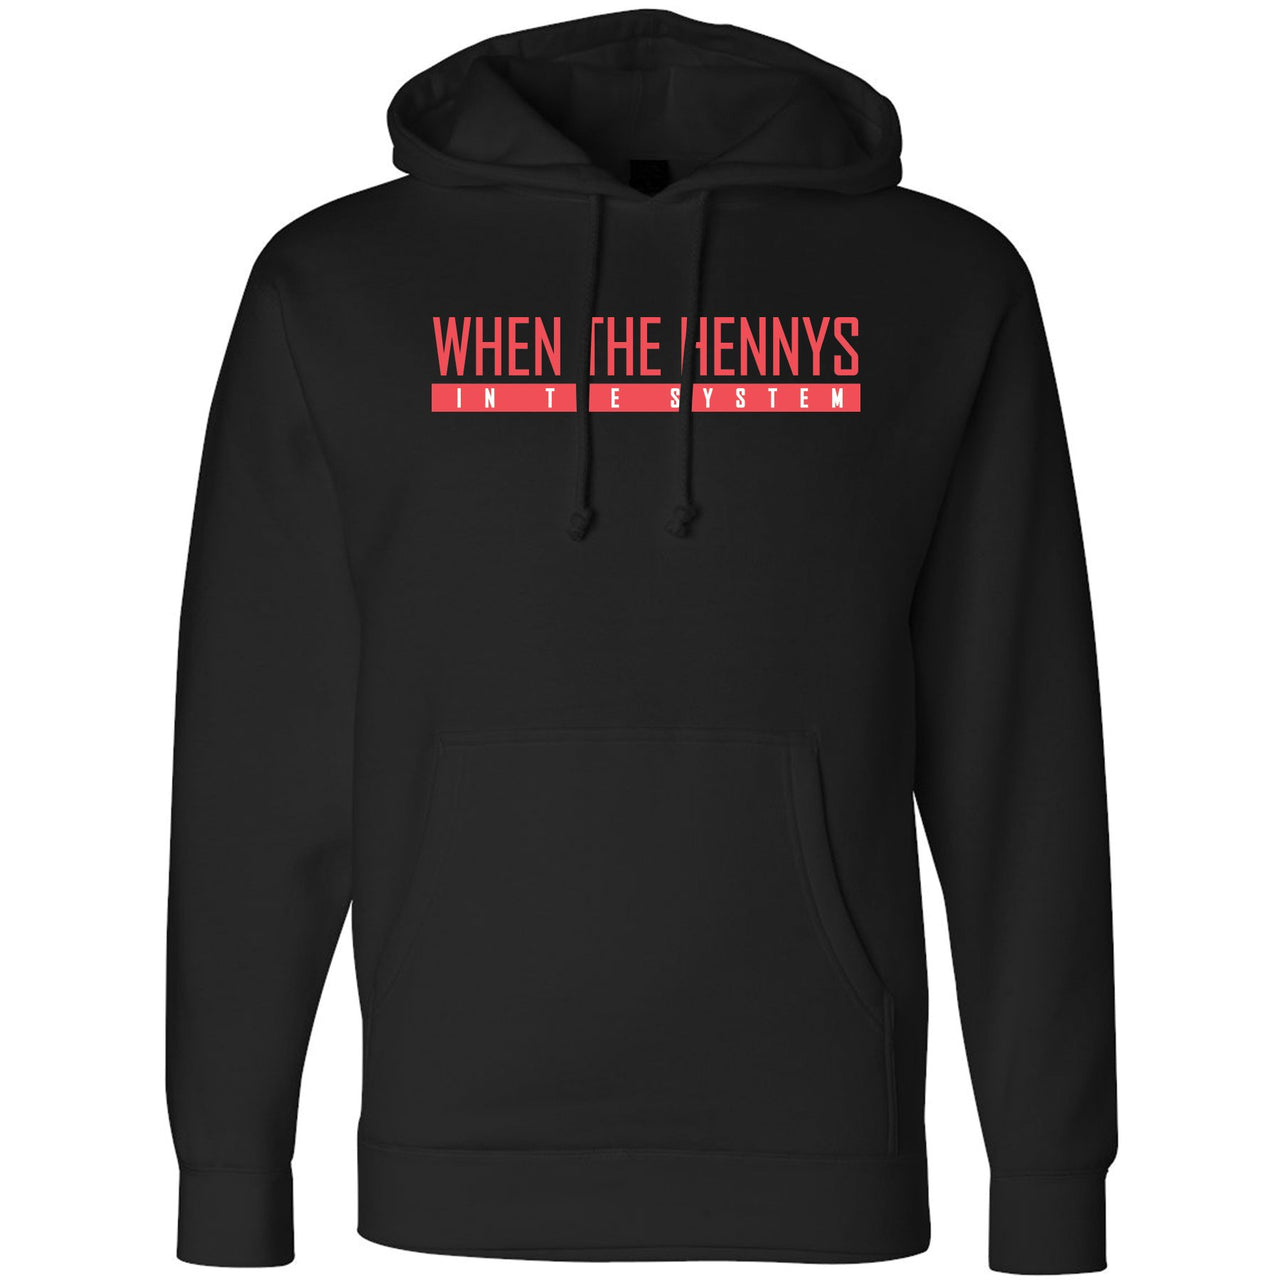 Infrared 6s Hoodie | When The Hennys In The System, Black